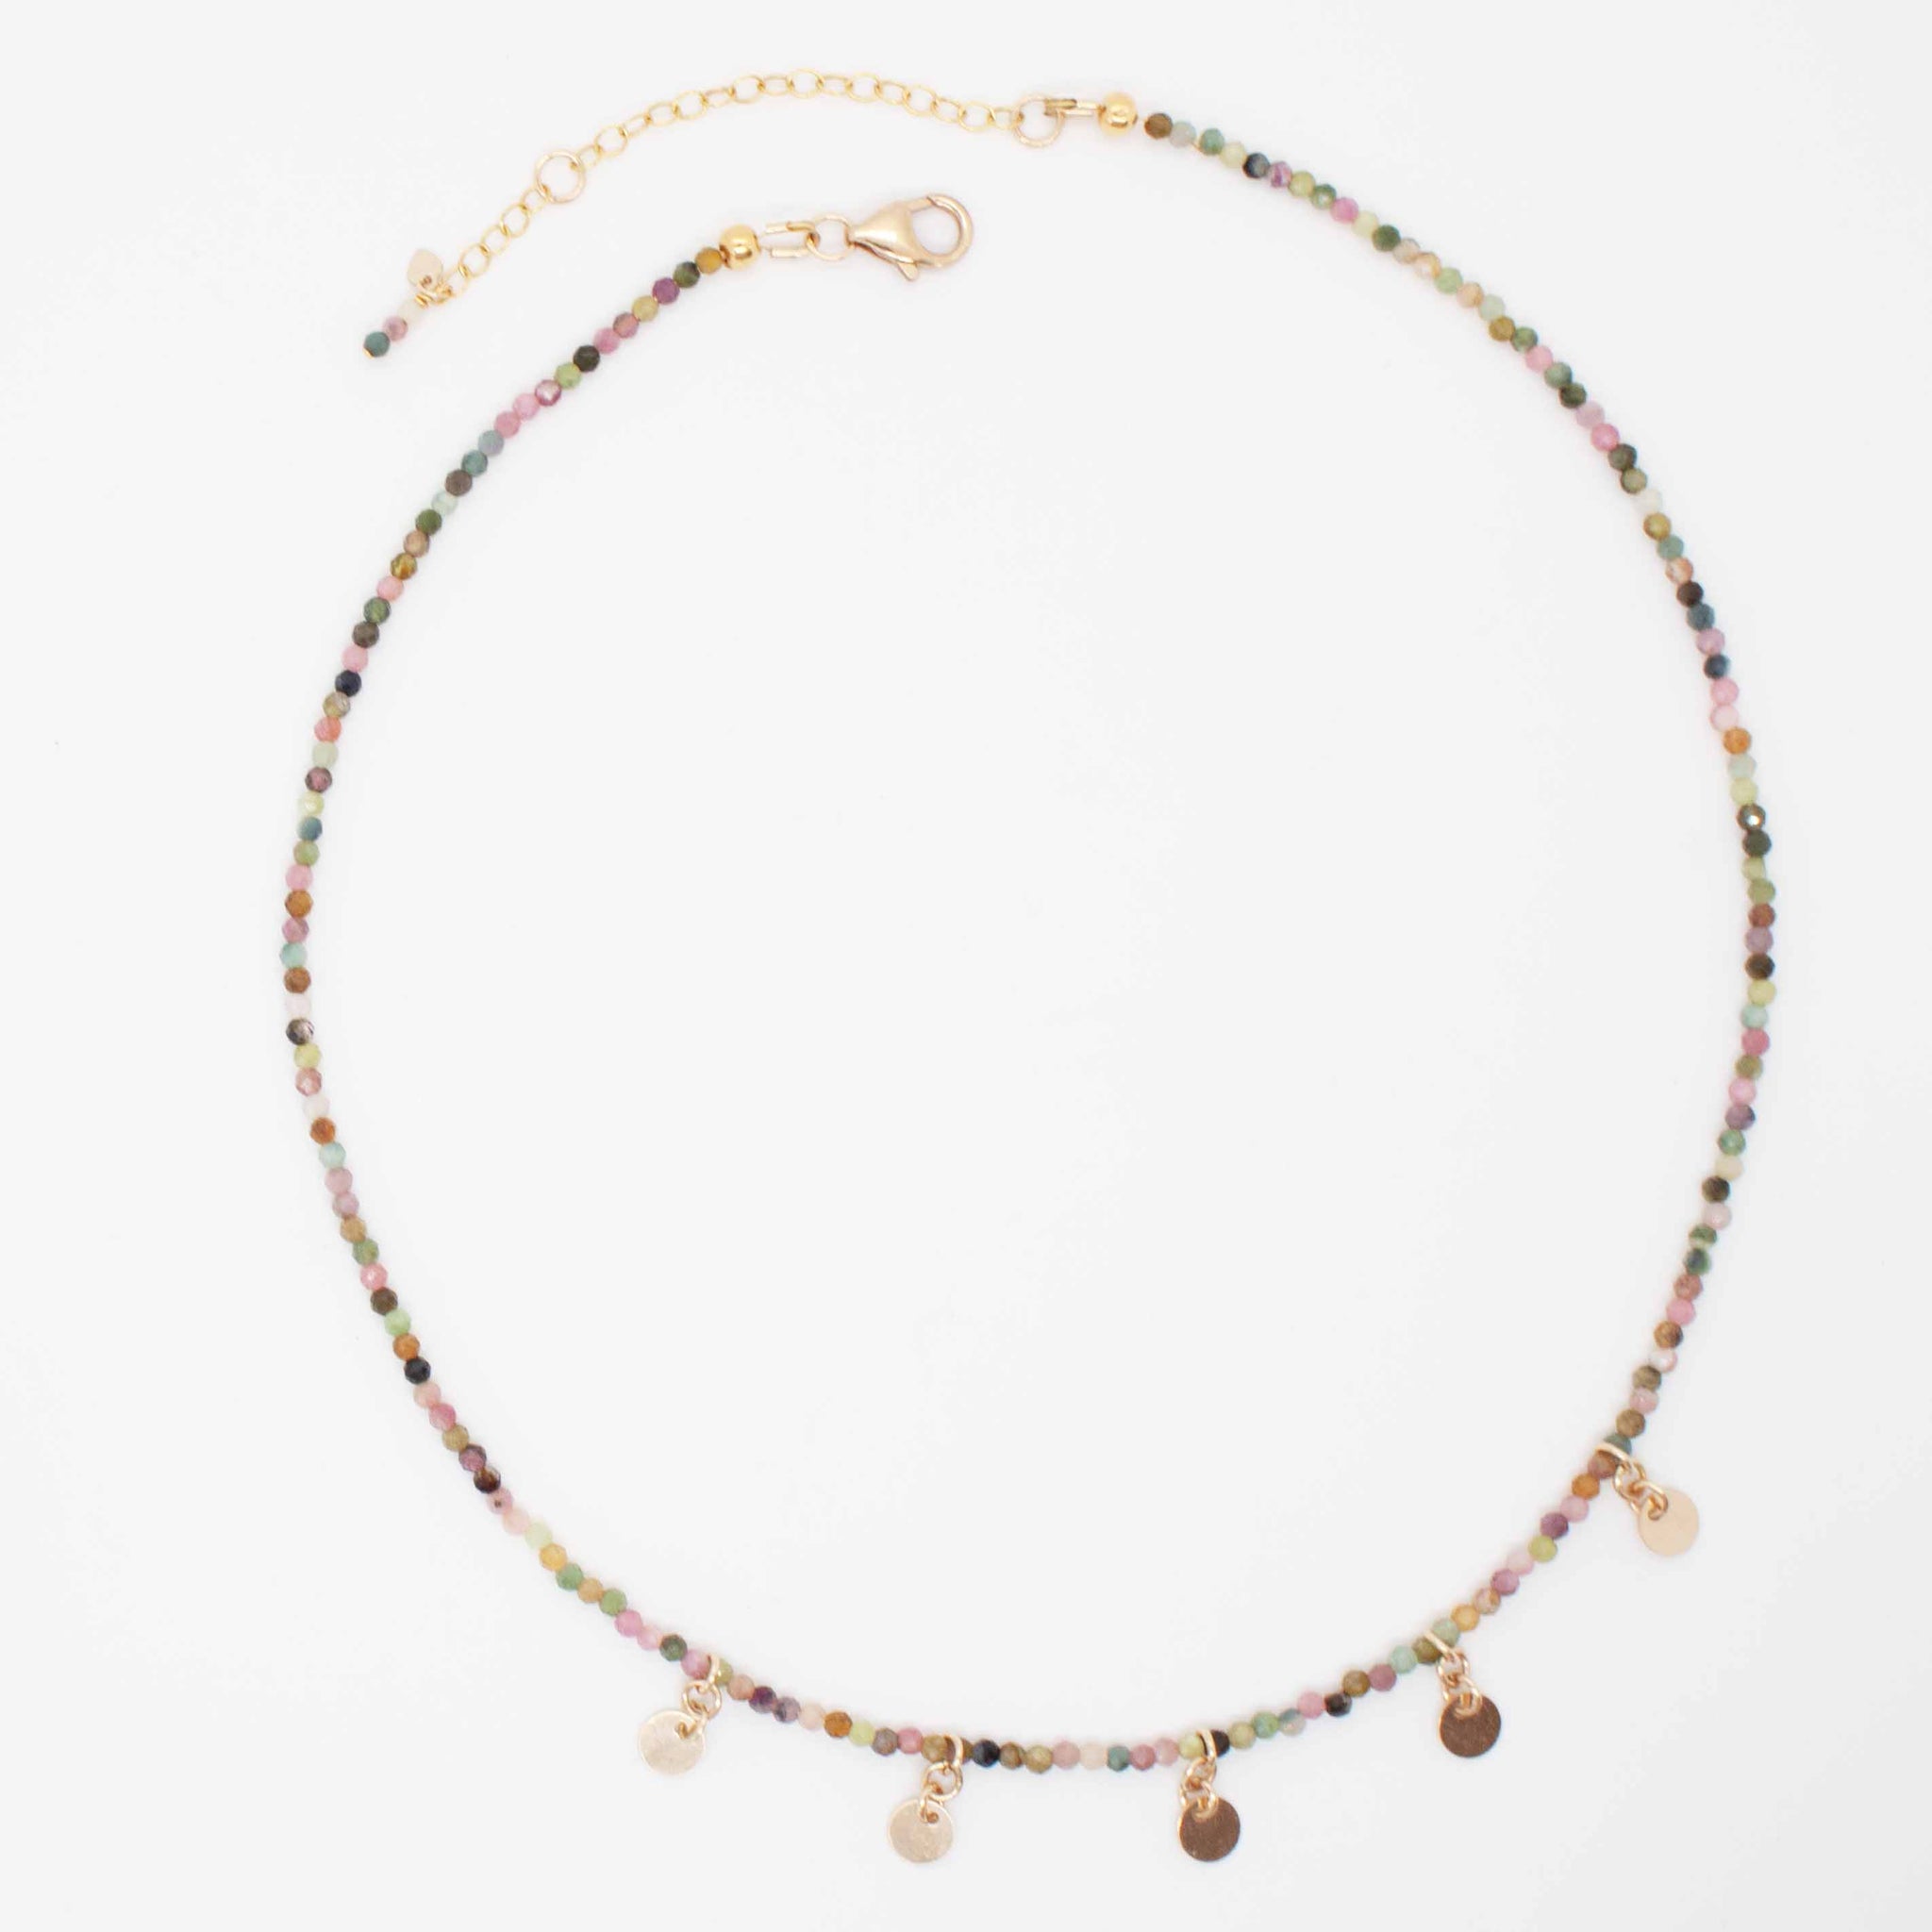 For LOVE of shimmering colour. 16" long (adjustable to 18") beaded rainbow tourmaline with gold disc charms. Handmade in Toronto kp jewelry co.